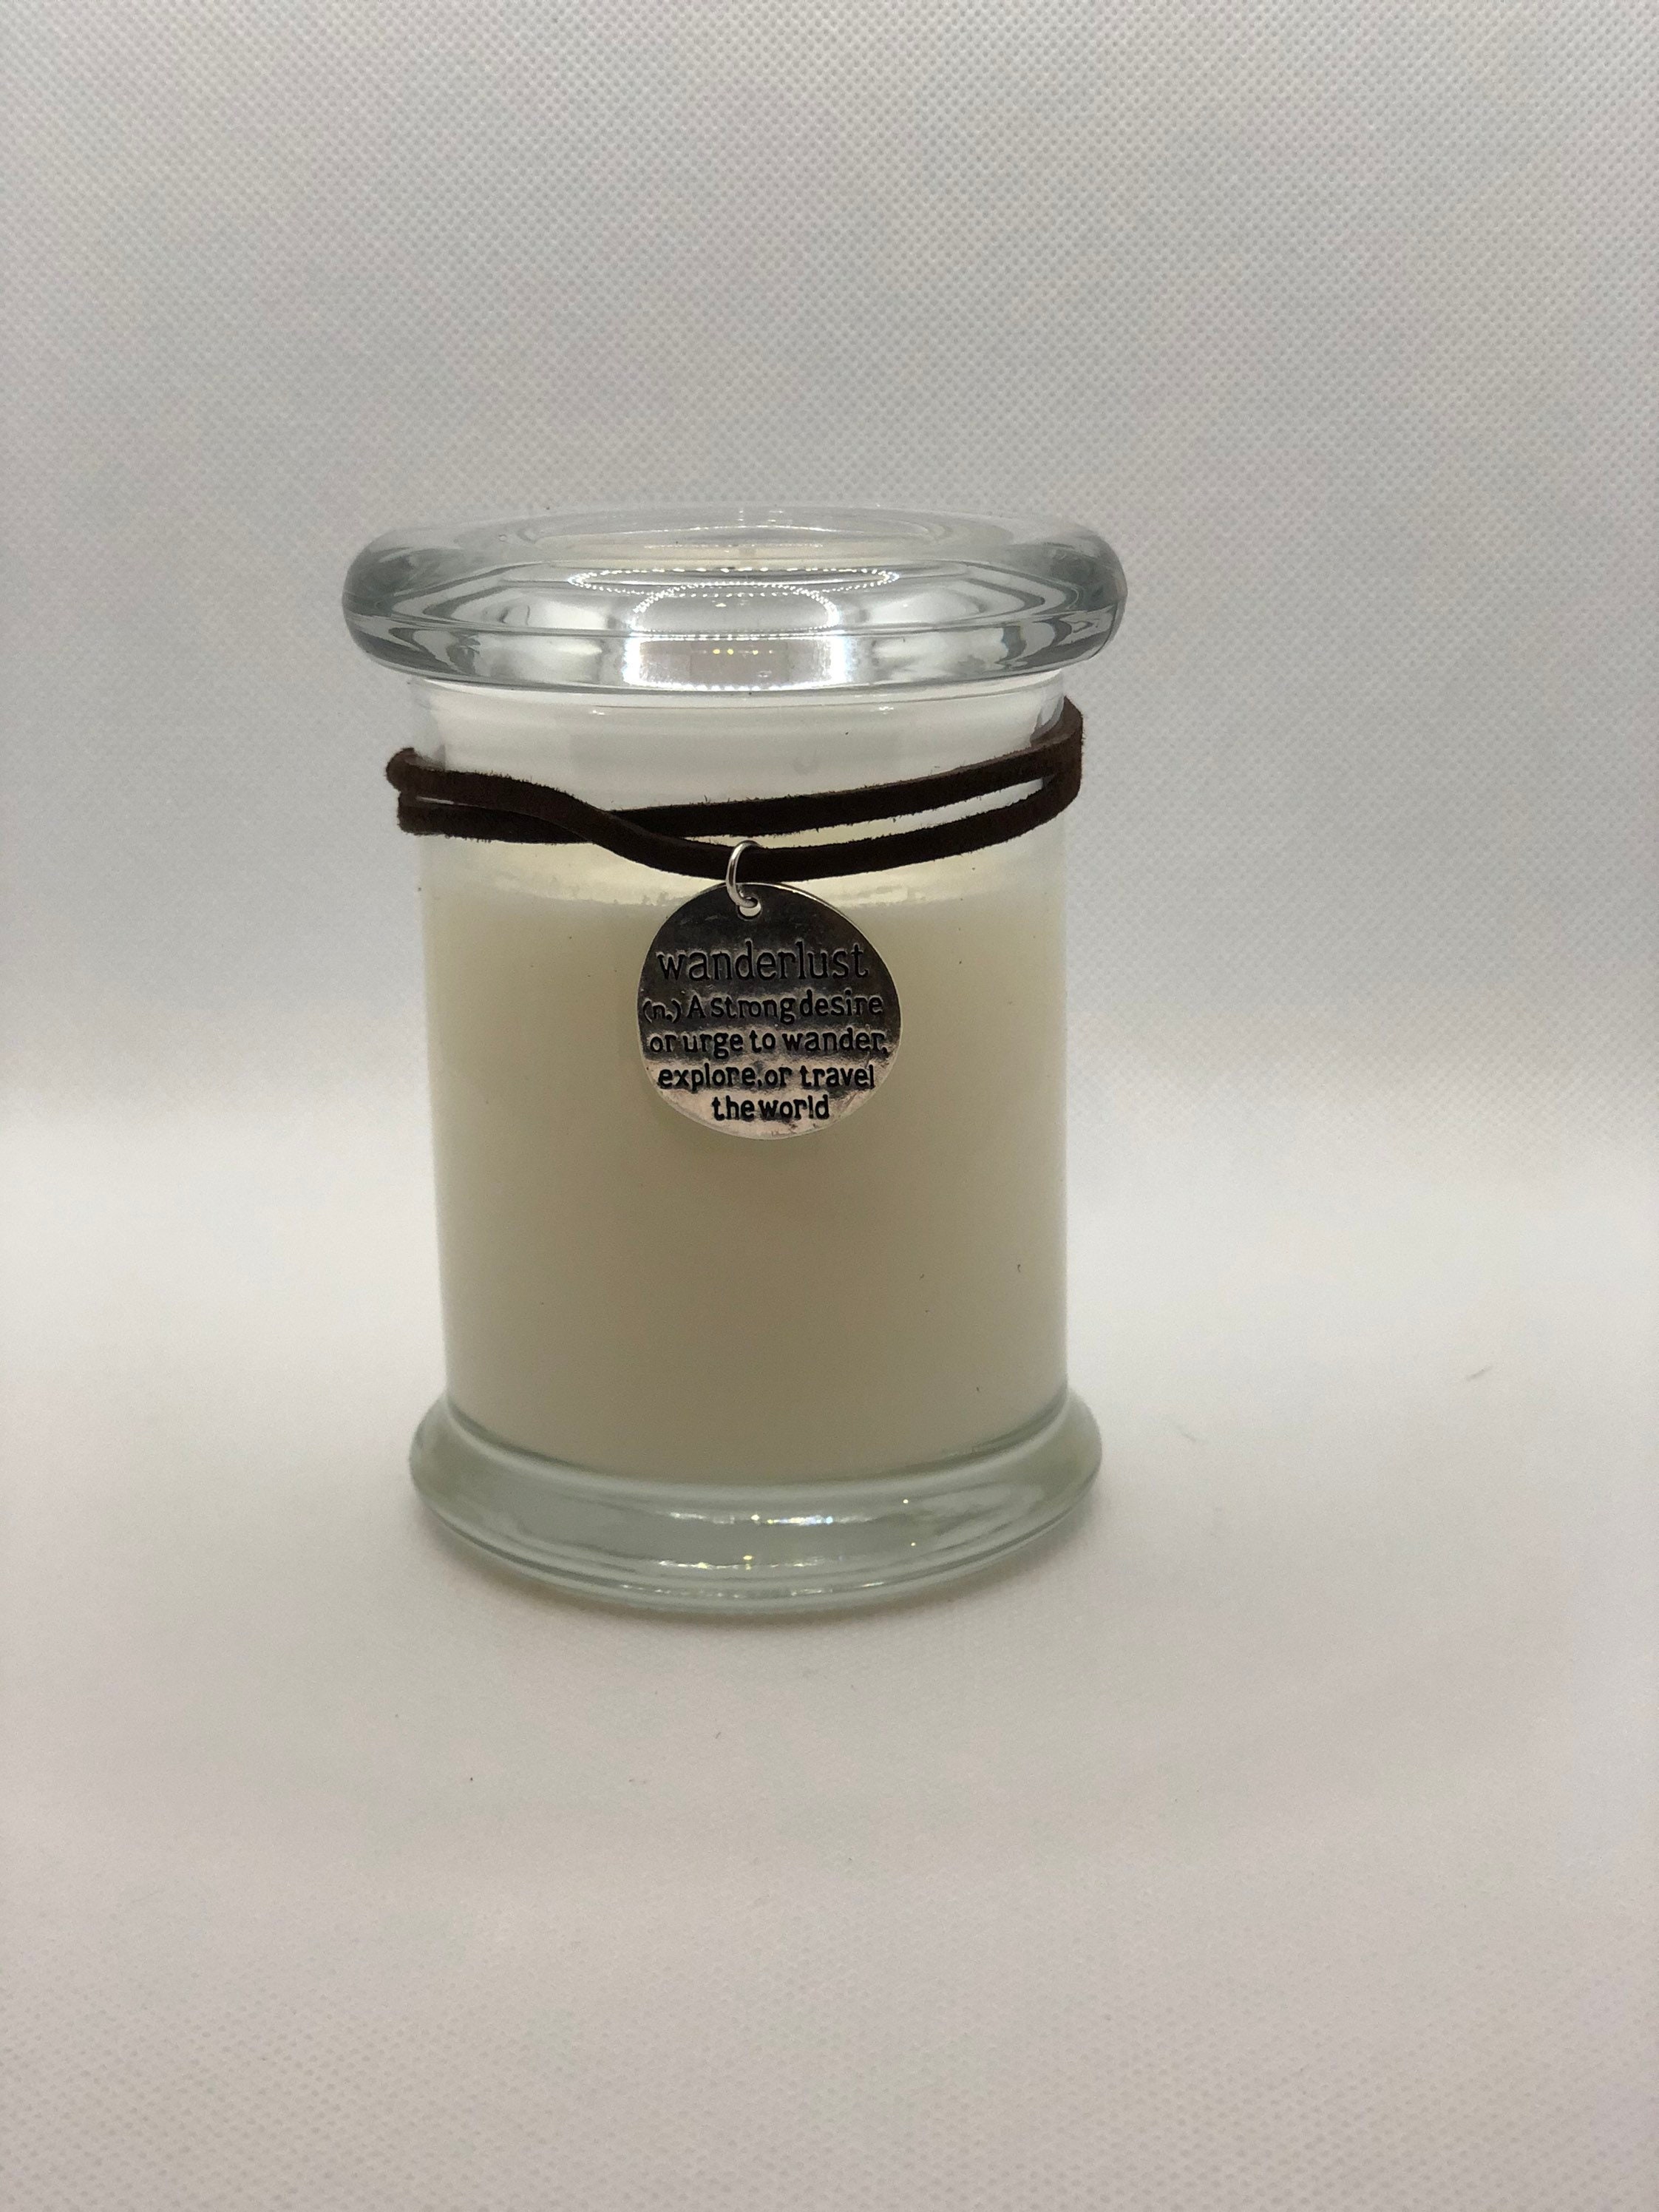 8 Ounce Apothecary Jar Candle Handmade and Hand Poured Filled With Soy ...